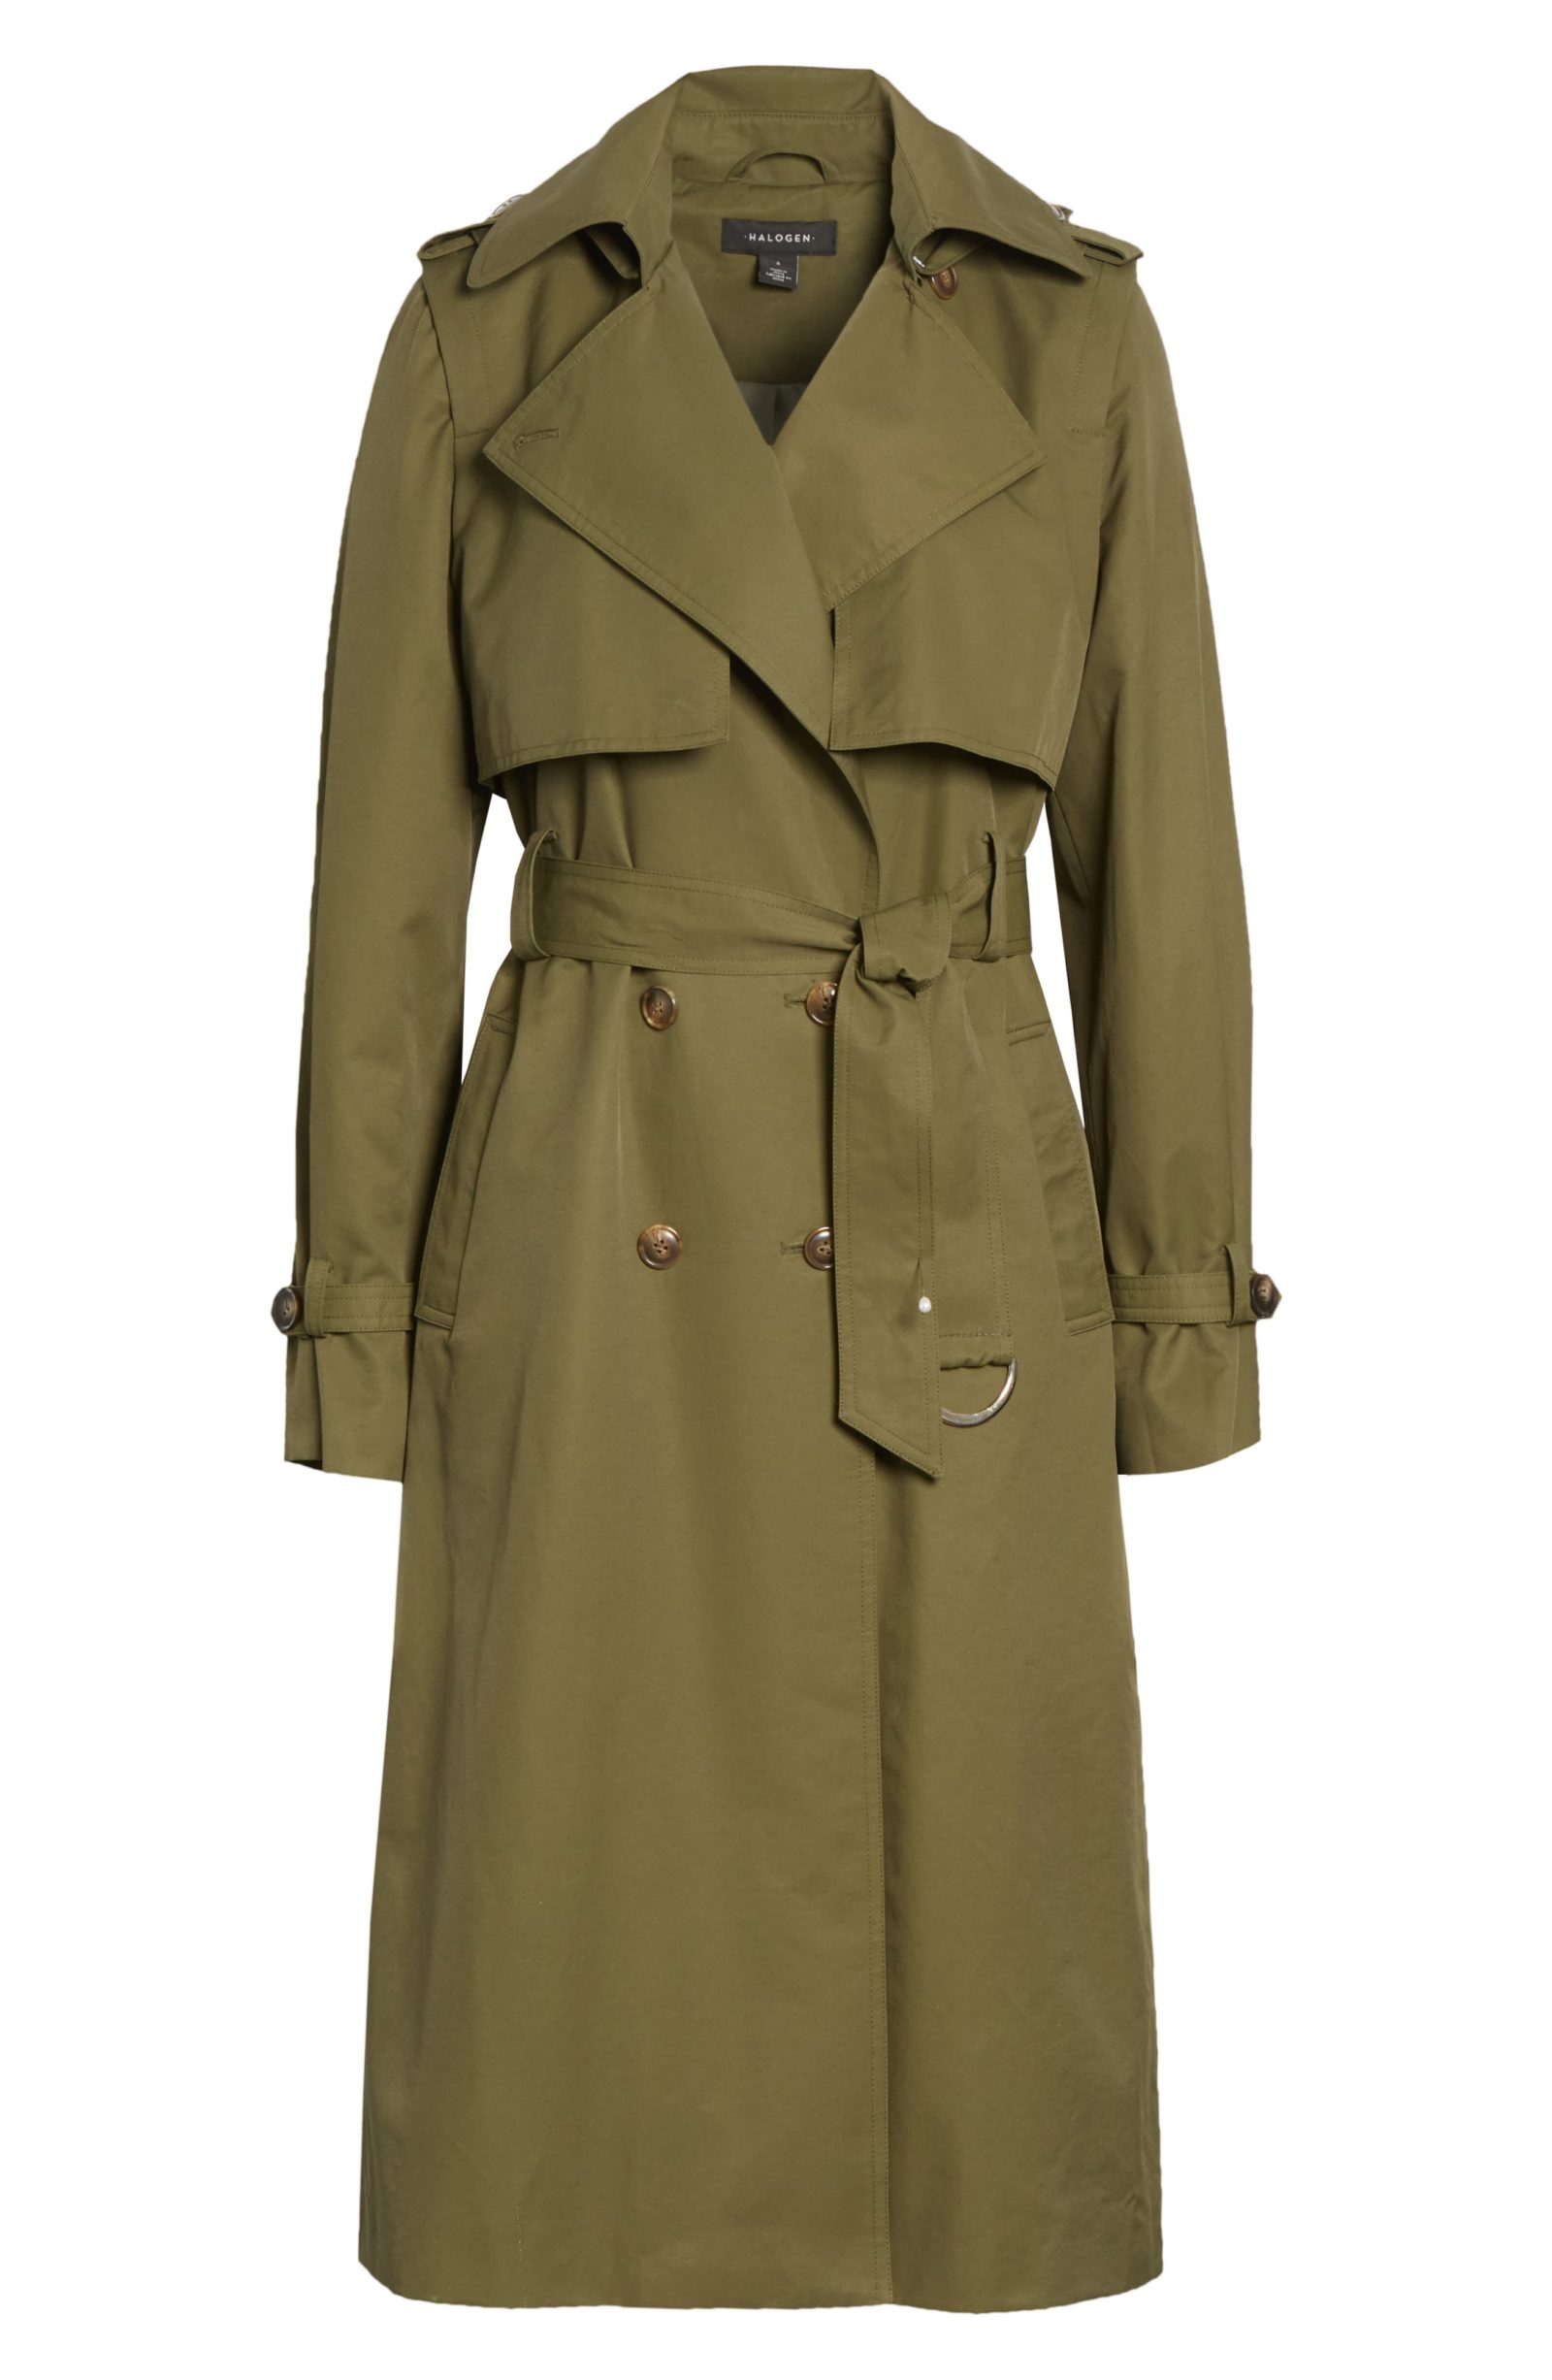 The Best Coats On Sale On Nordstrom That You Don’t Want To Miss Out On ...